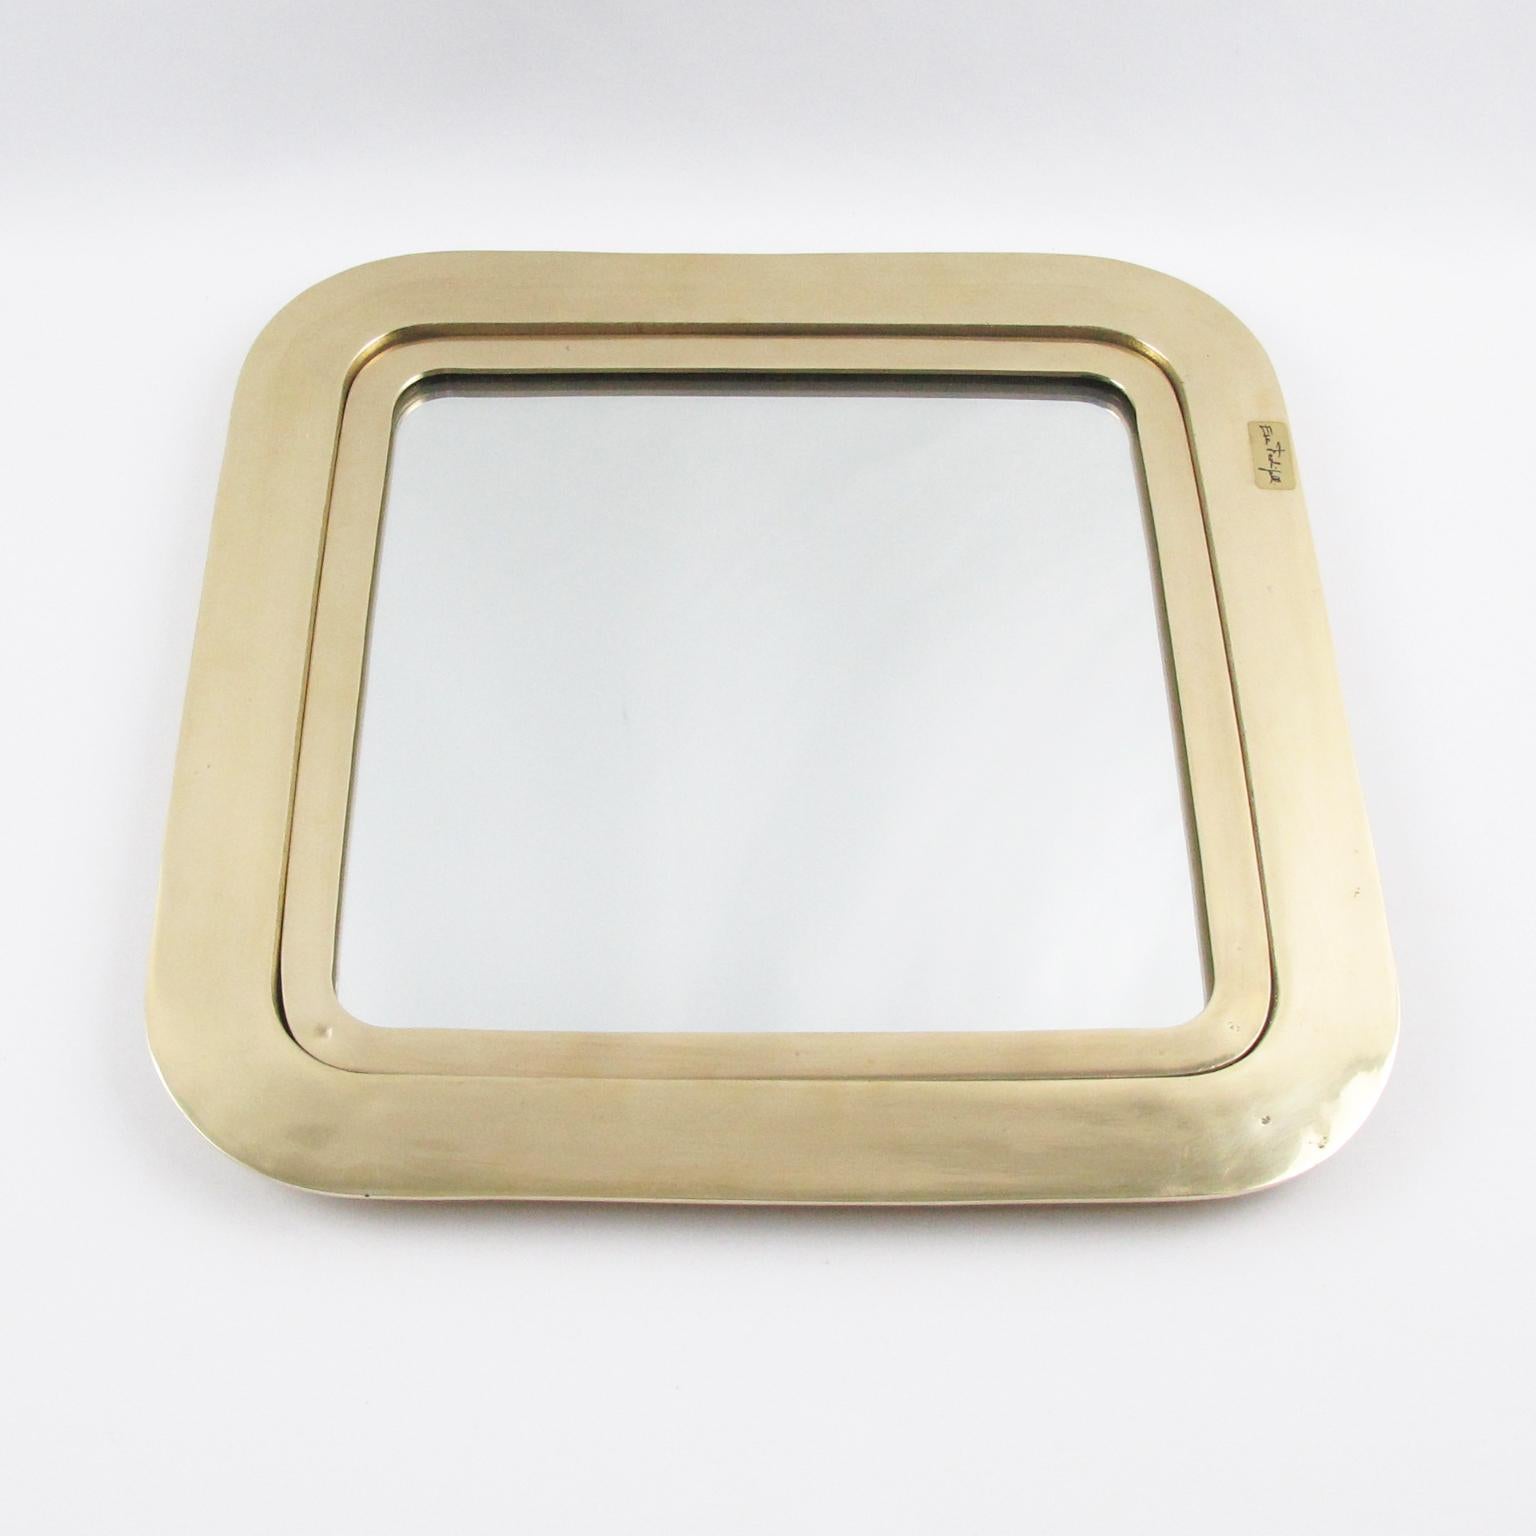 Italian artist Esa Fedrigolli crafted this impressive polished gilded bronze centerpiece tray, platter, or vide poche. The piece features a heavy square shape with rounded corners and a mirror insert with glass protection. The centerpiece is signed